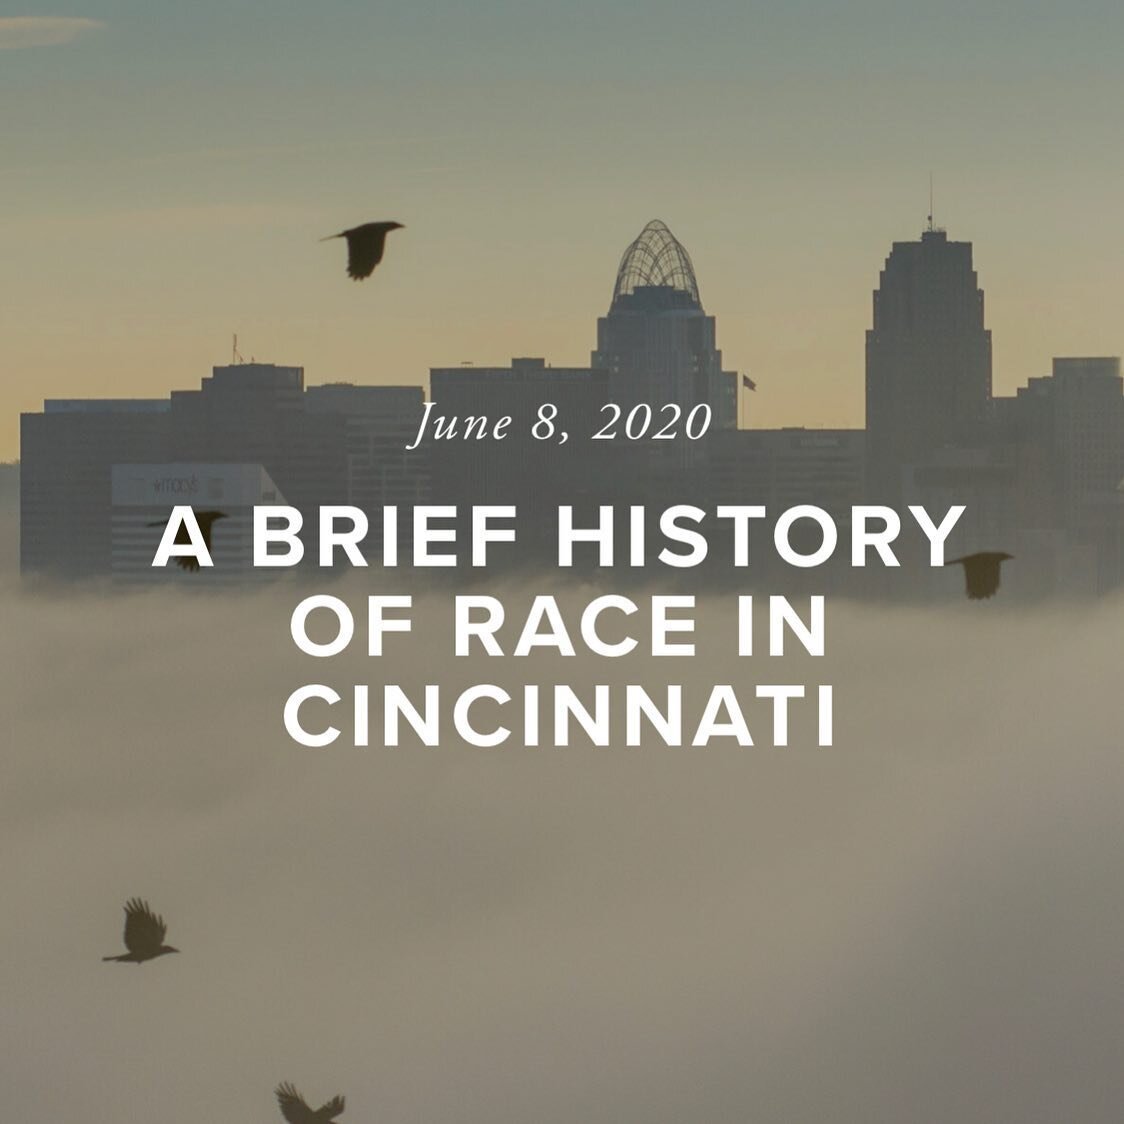 My love of Cincinnati doesn&rsquo;t ignore its failings. Like most cities, there are strains of ugliness that undermine the beauty of my hometown. Most significantly, I&rsquo;m saddened by how we&rsquo;ve dealt with issues of race. Recent days have l